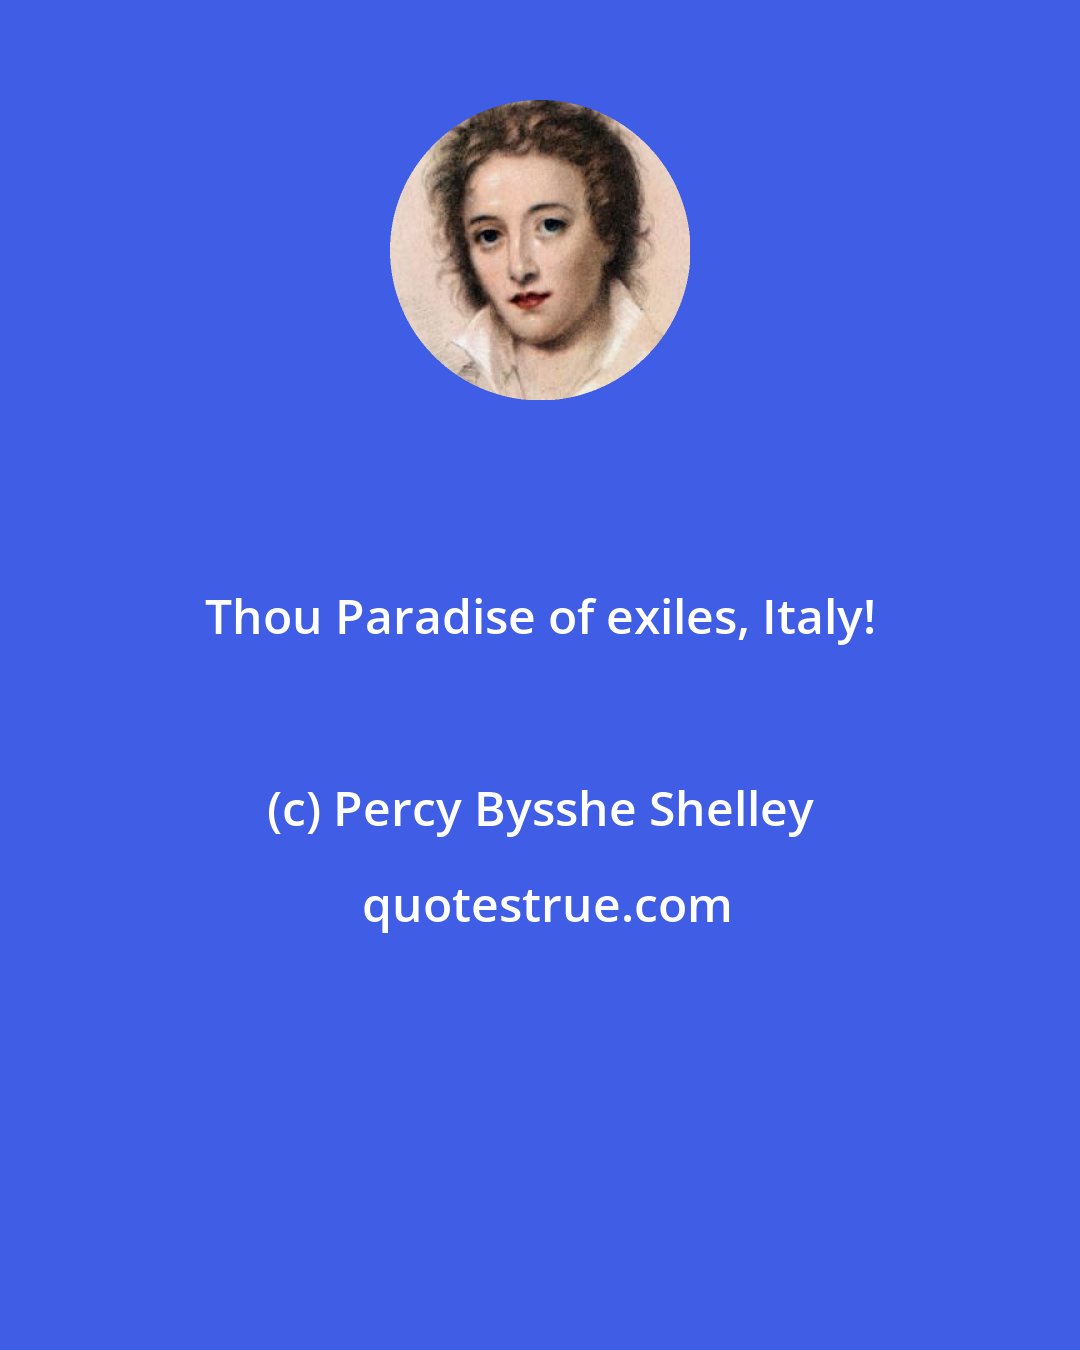 Percy Bysshe Shelley: Thou Paradise of exiles, Italy!